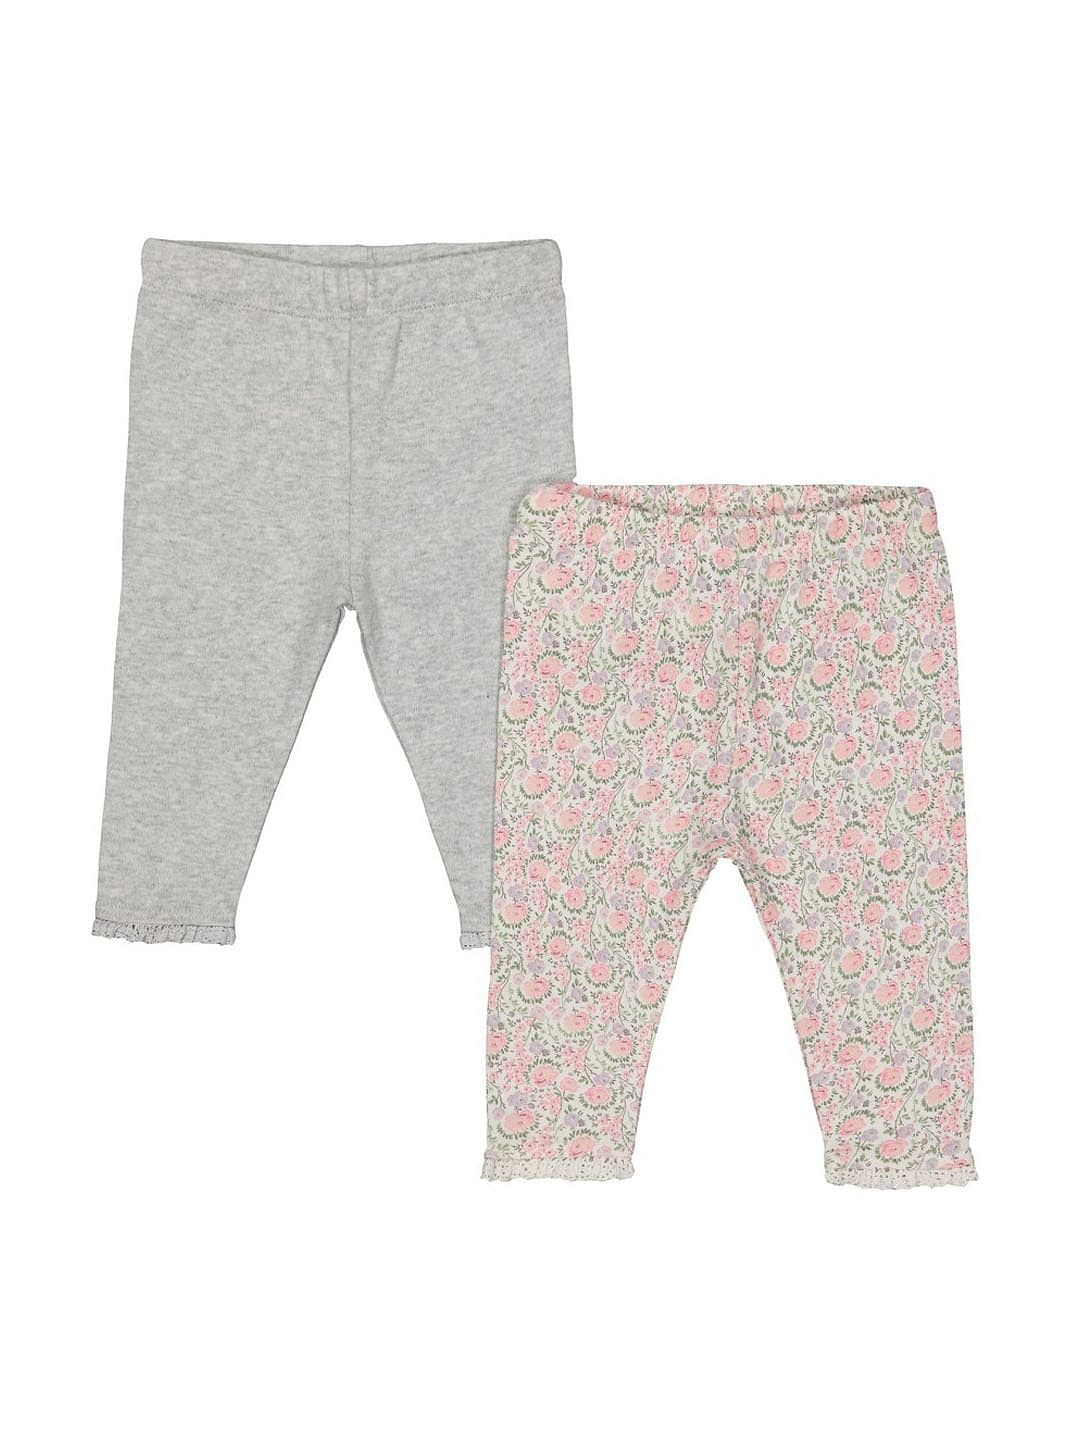 Mothercare | Grey and Floral Leggings  Pack of 2 0